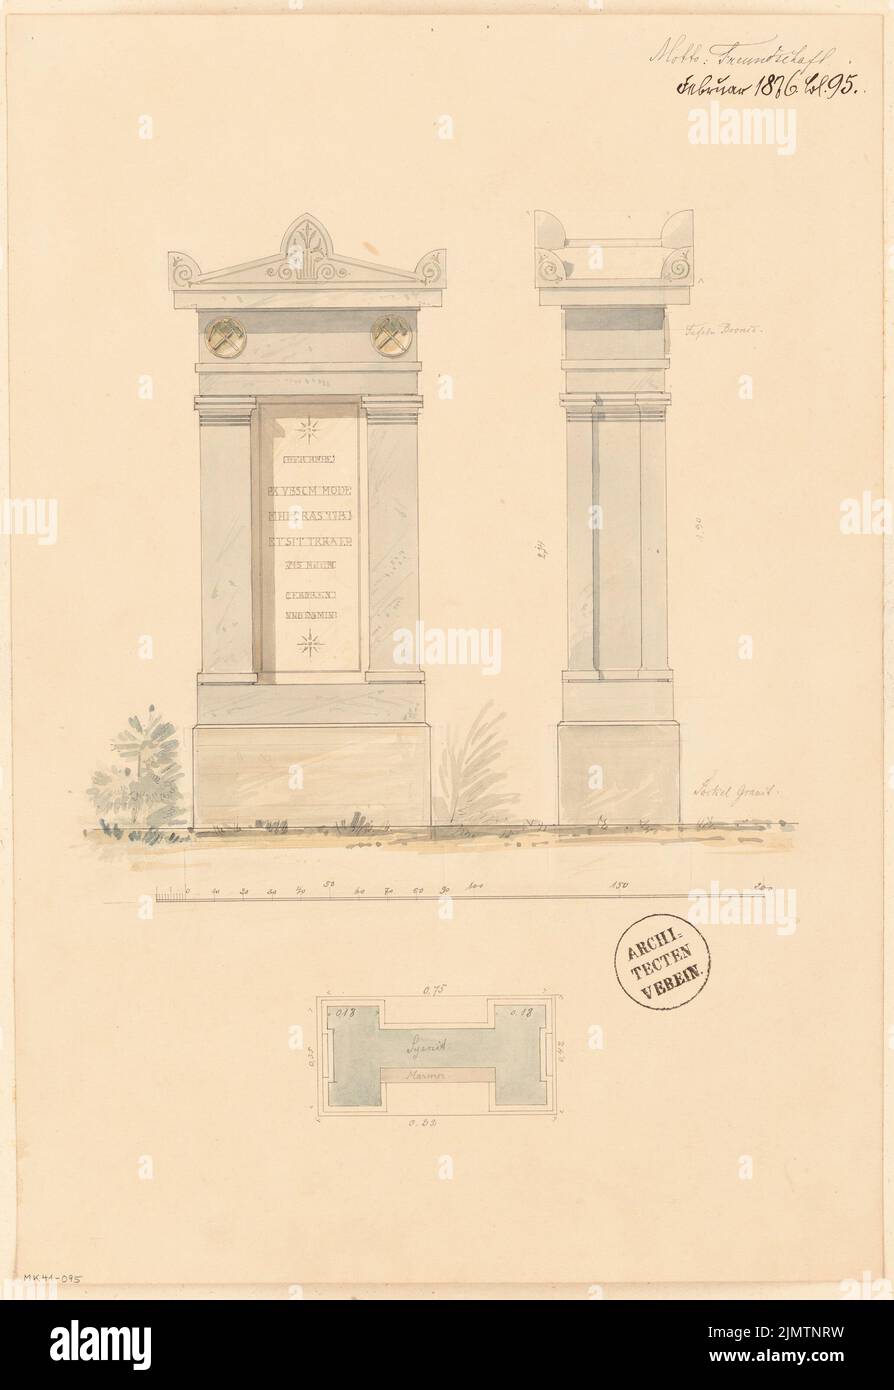 Unknown architect, grave monument for a mire director. Monthly competition February 1876 (02.1876): floor plan, ancestry front view, side view; Scale bar. Ink and pencil watercolored on the box, 44.9 x 30.9 cm (including scan edges) N.N. : Grabdenkmal für einen Grubendirektor. Monatskonkurrenz Februar 1876 Stock Photo